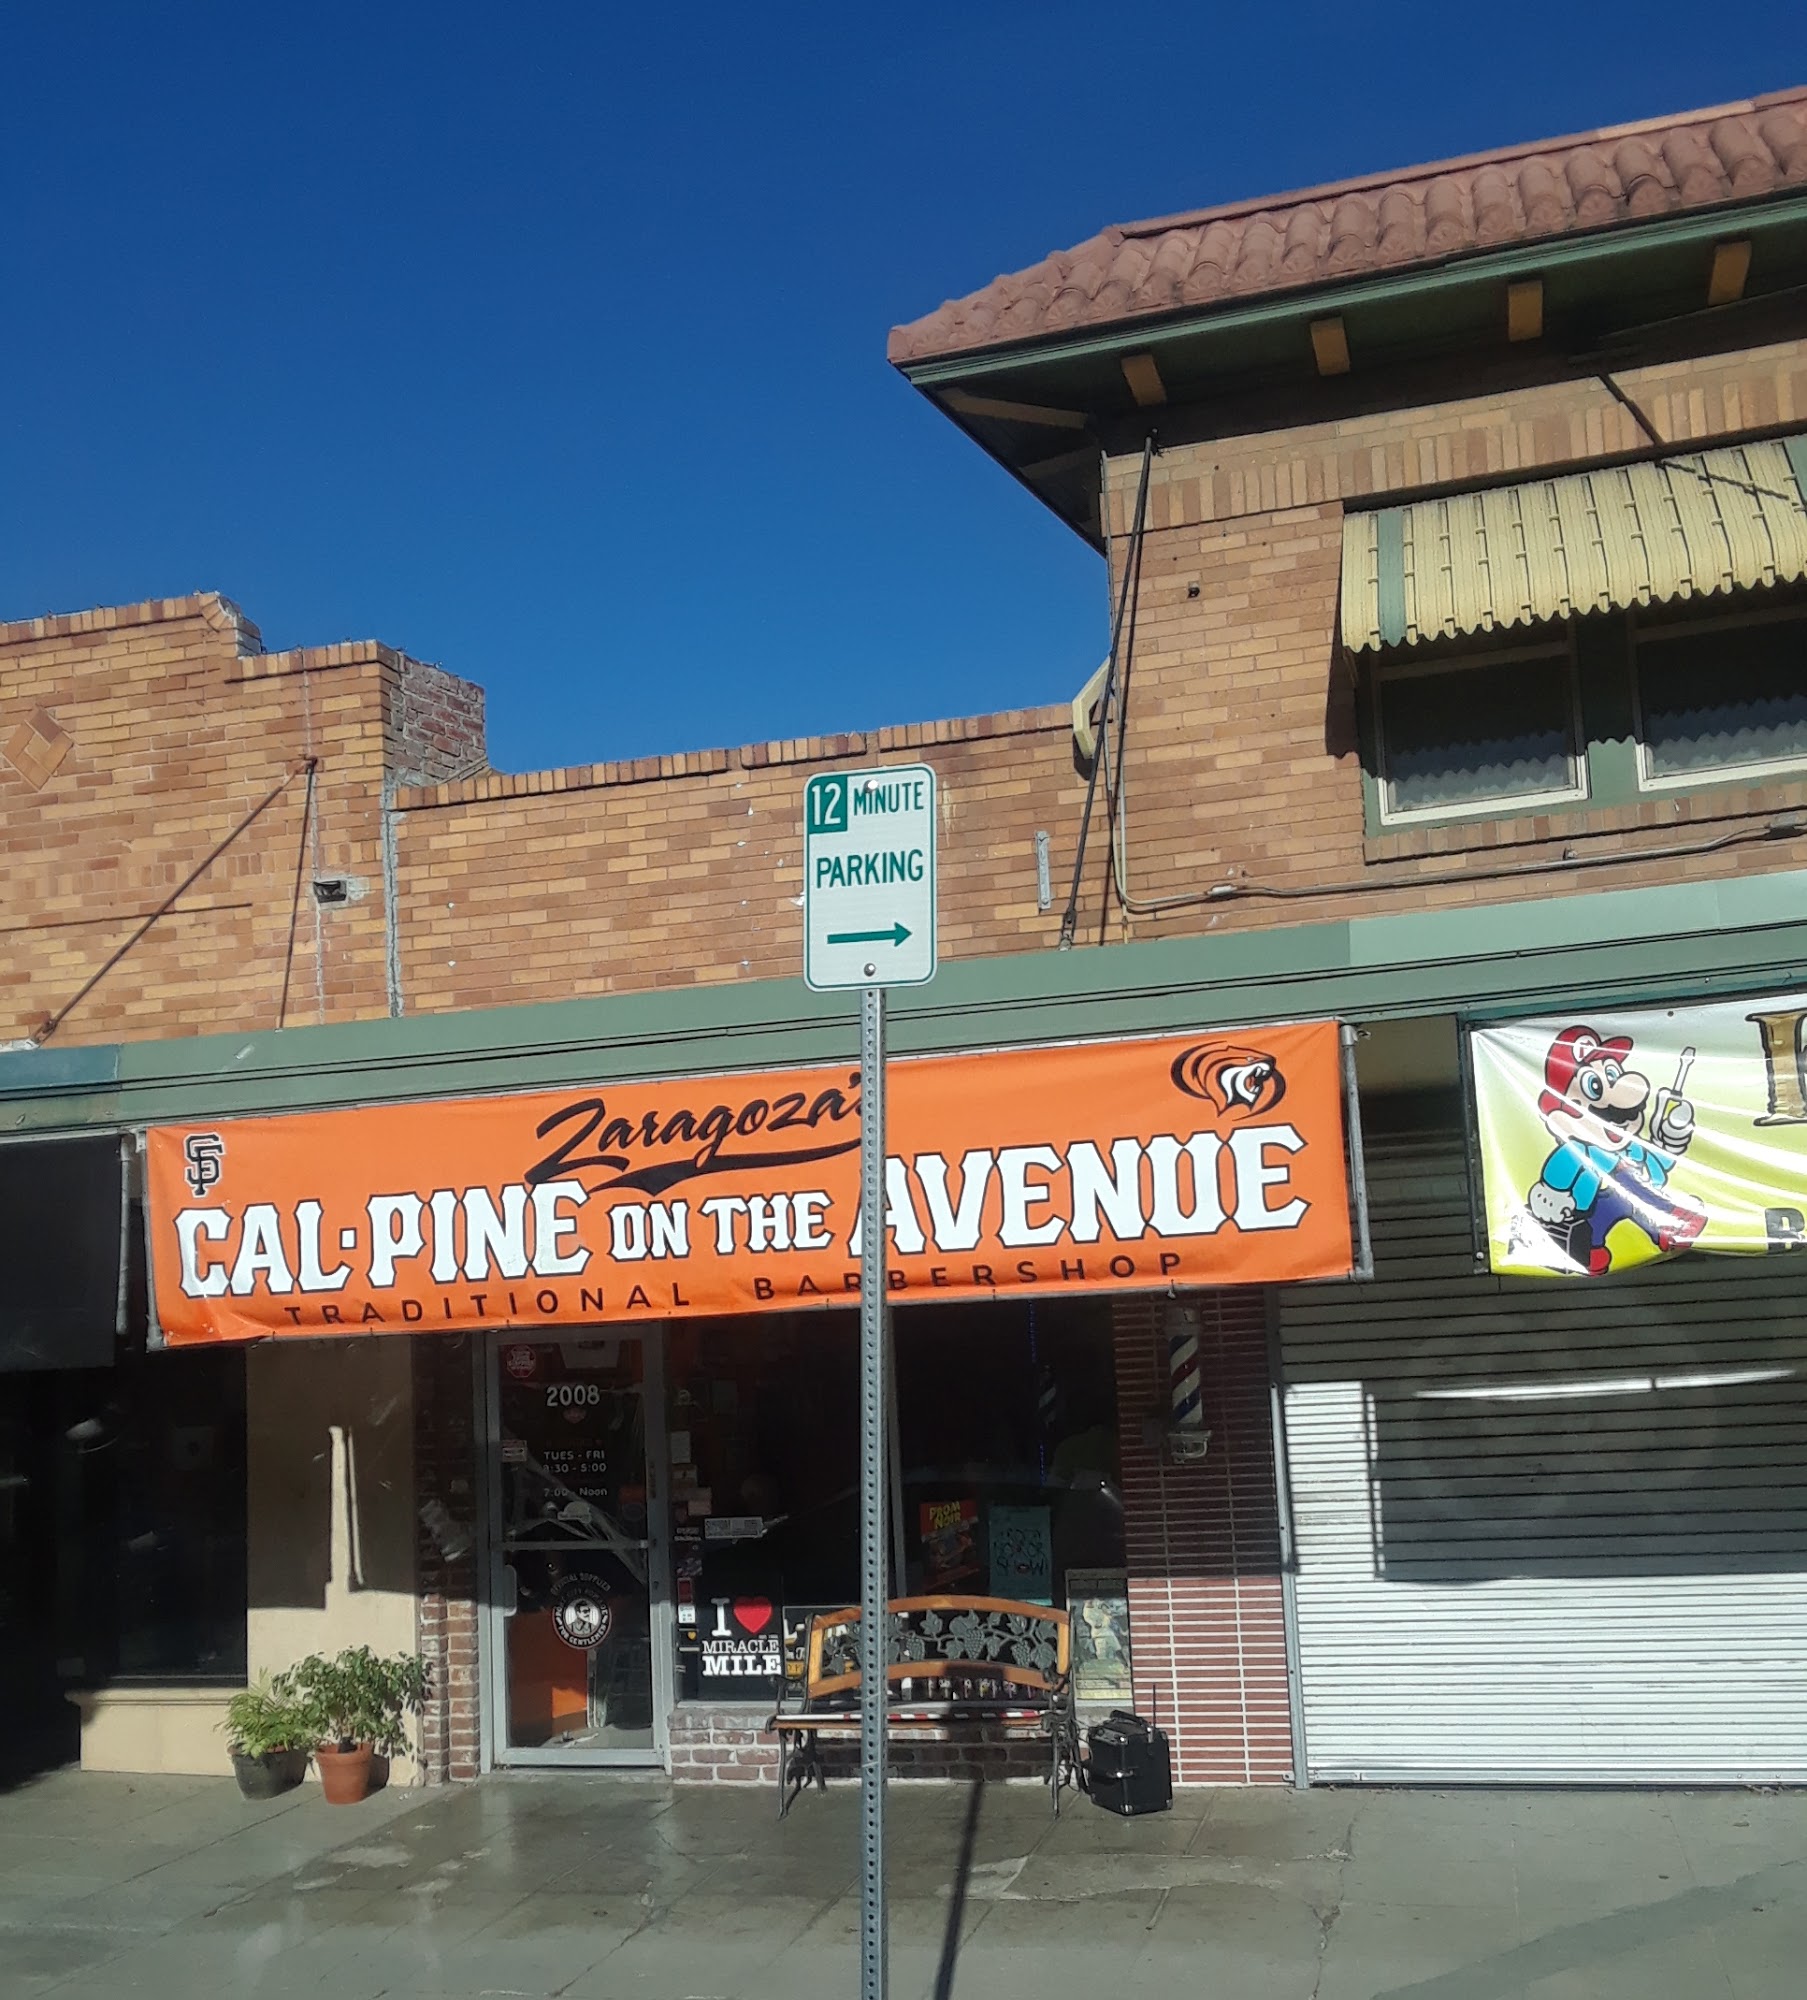 Cal-Pine on the ave